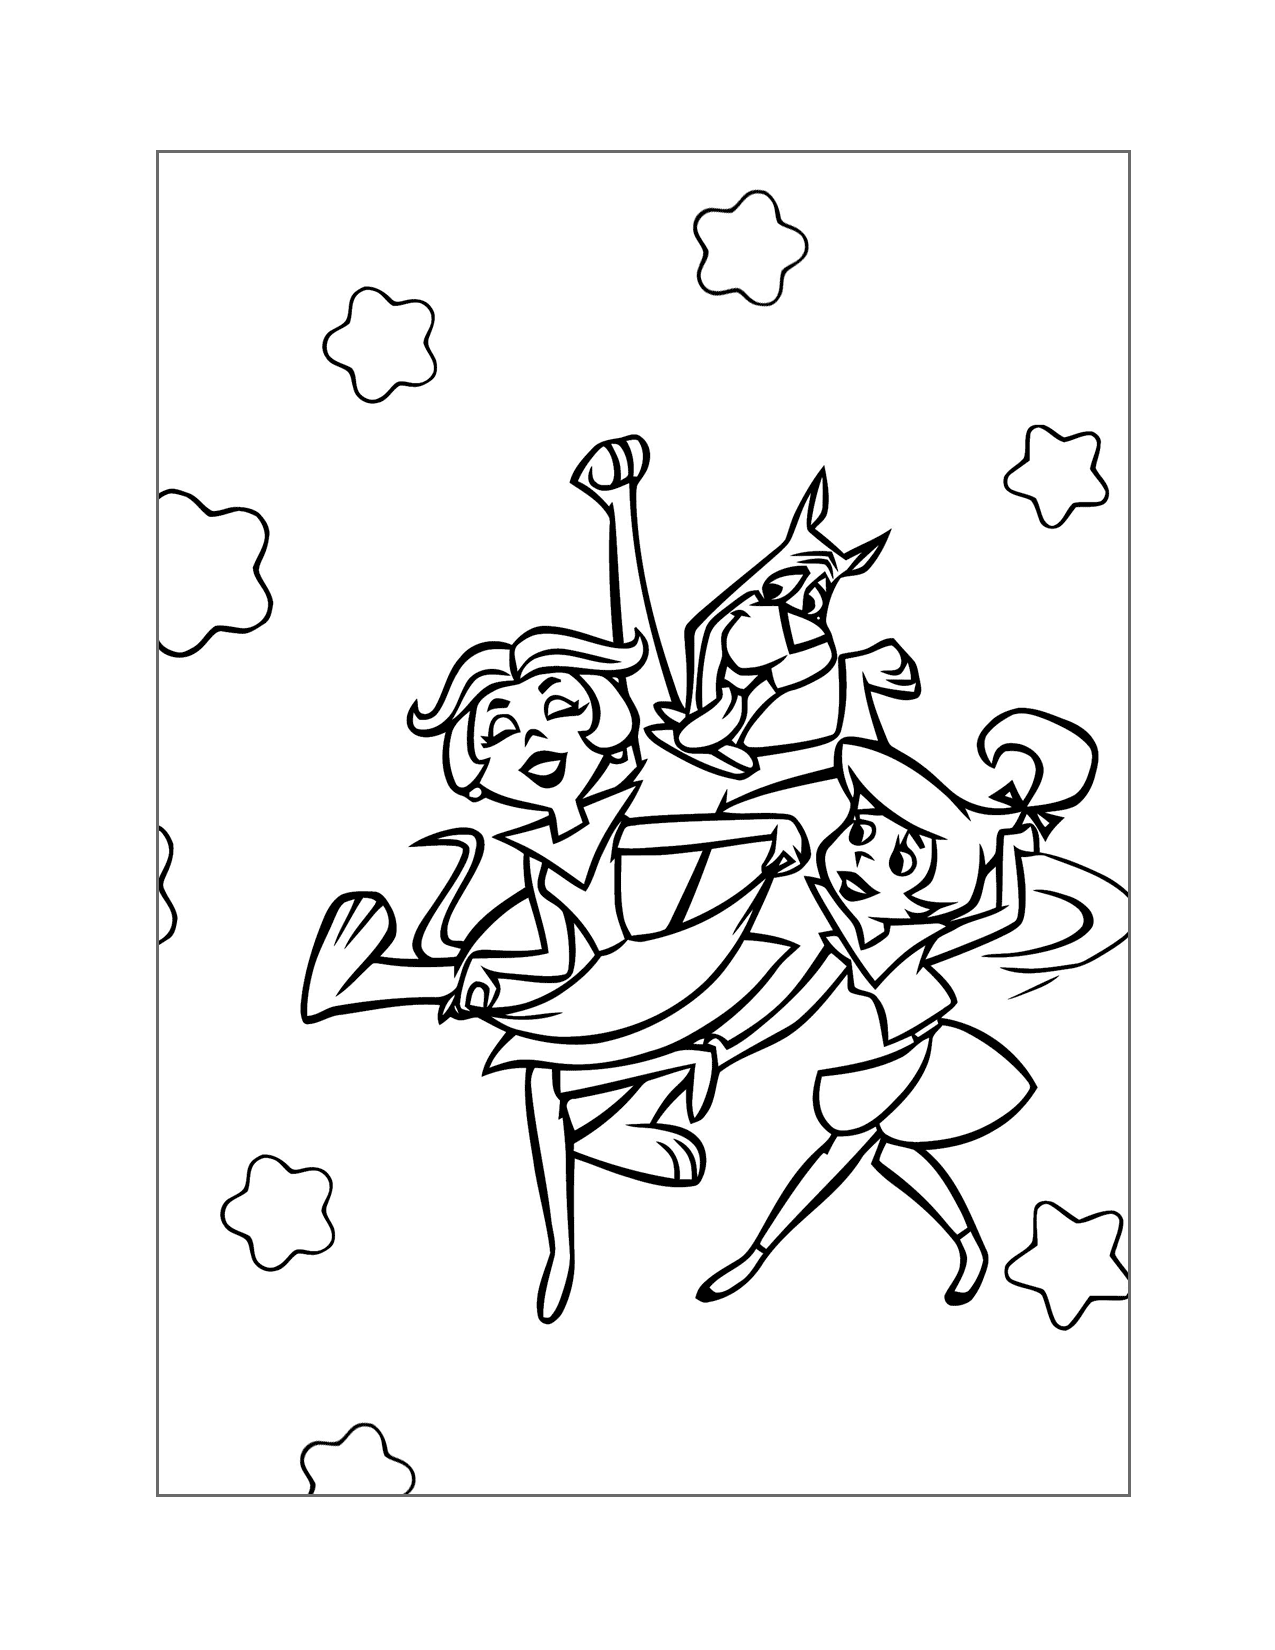 The Jetsons Dancing Coloring Page